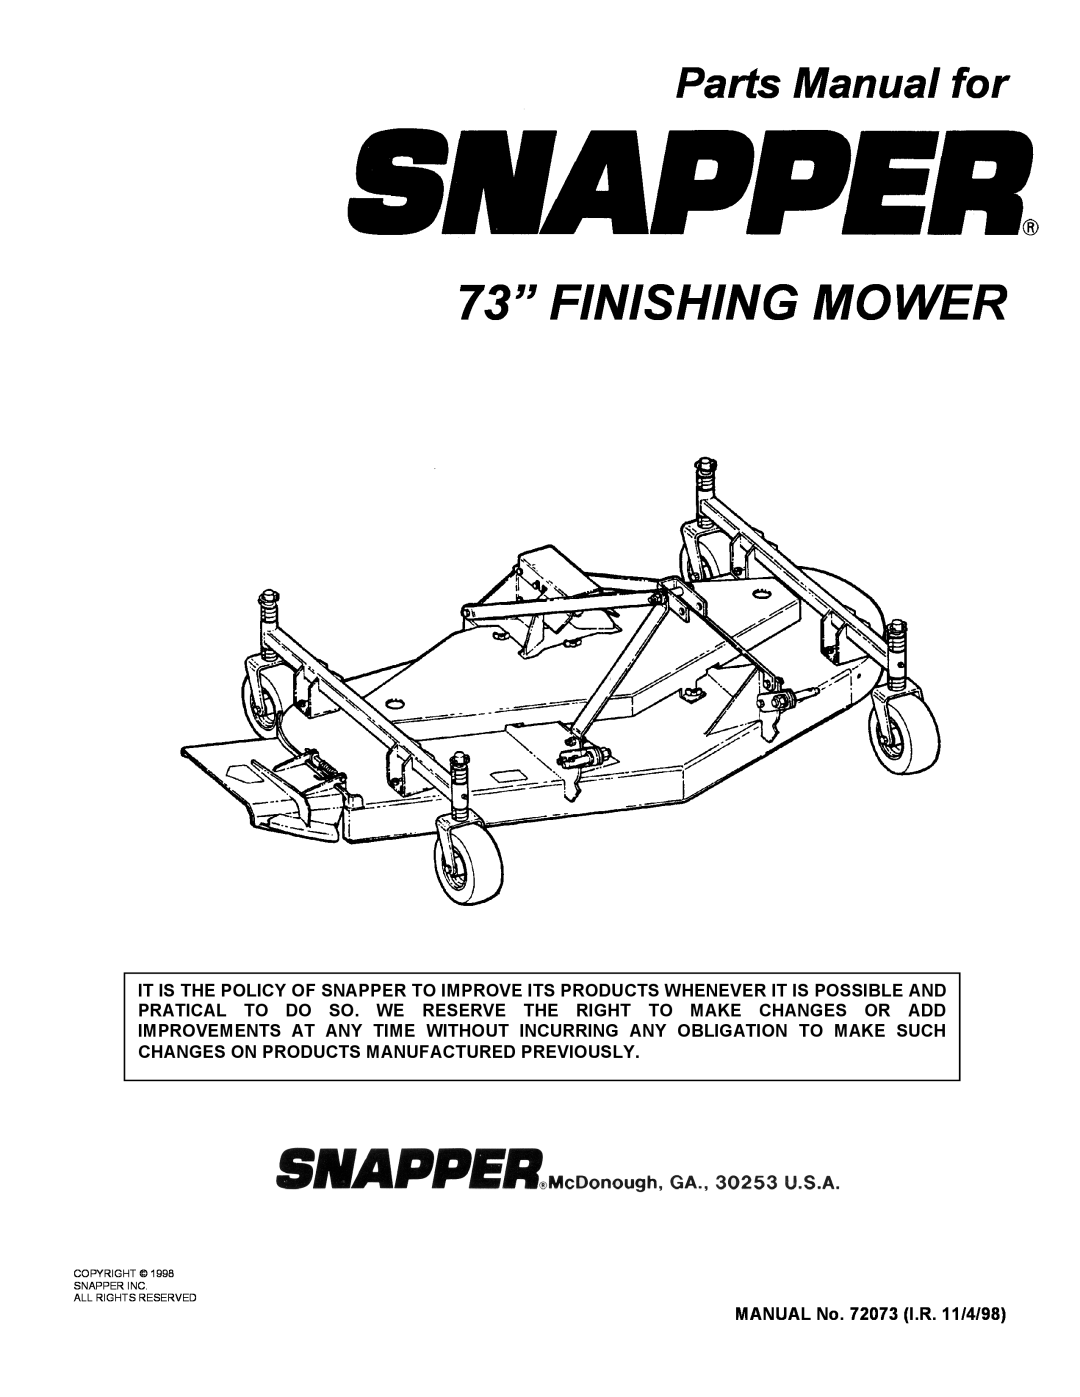 Snapper Finishing Mower manual 73” FINISHING MOWER, Parts Manual for, Copyright Snapper Inc All Rights Reserved 